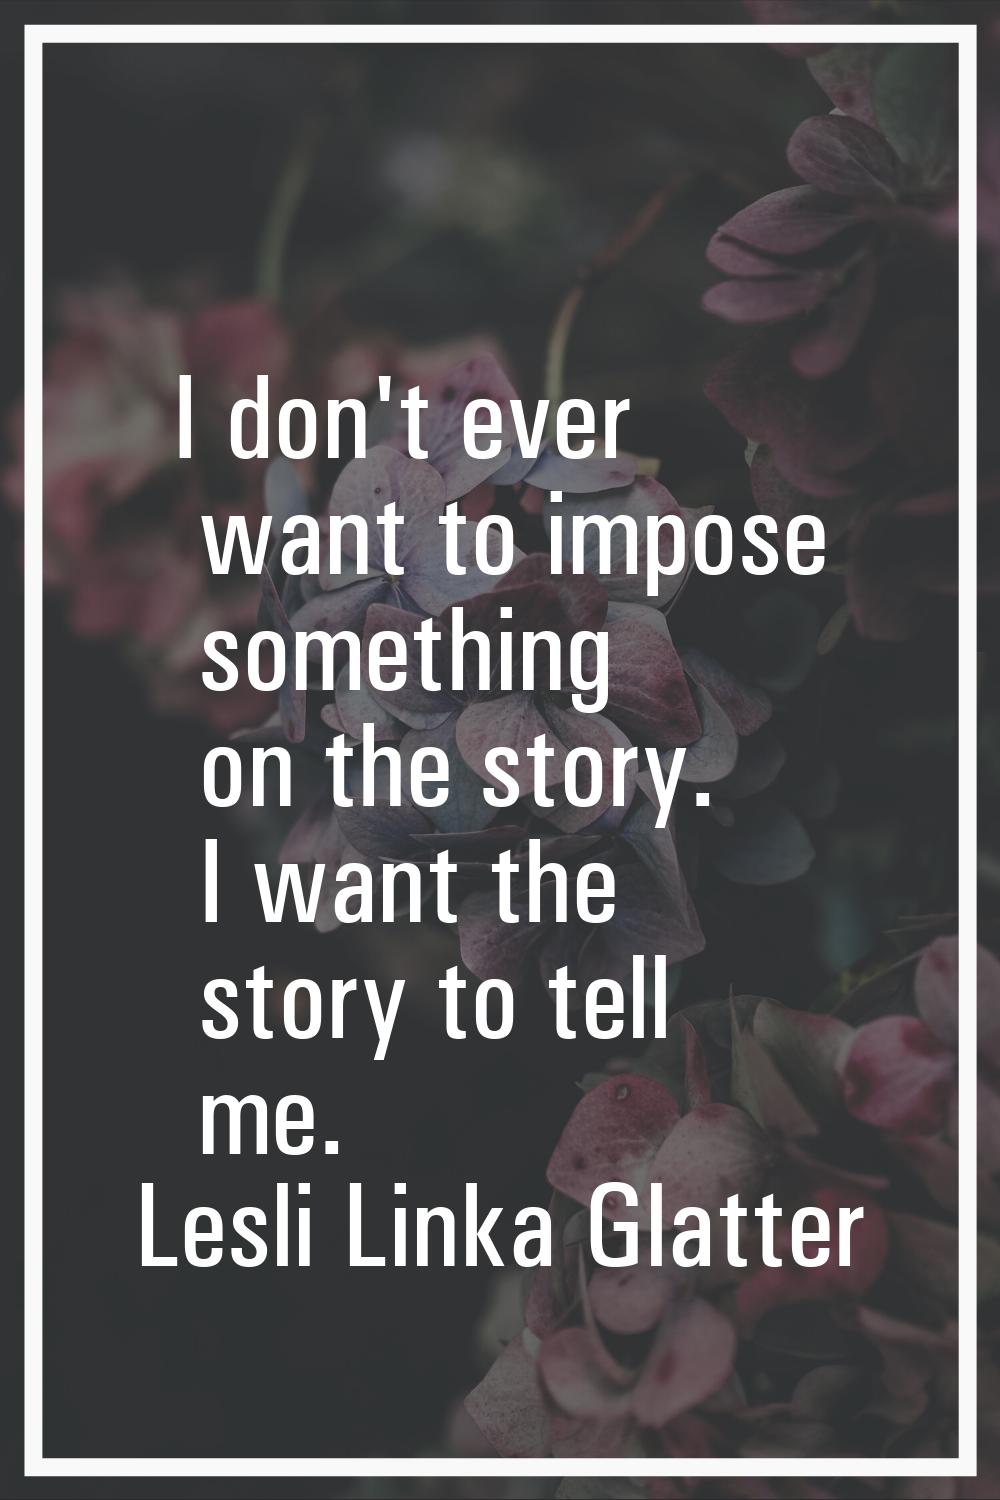 I don't ever want to impose something on the story. I want the story to tell me.